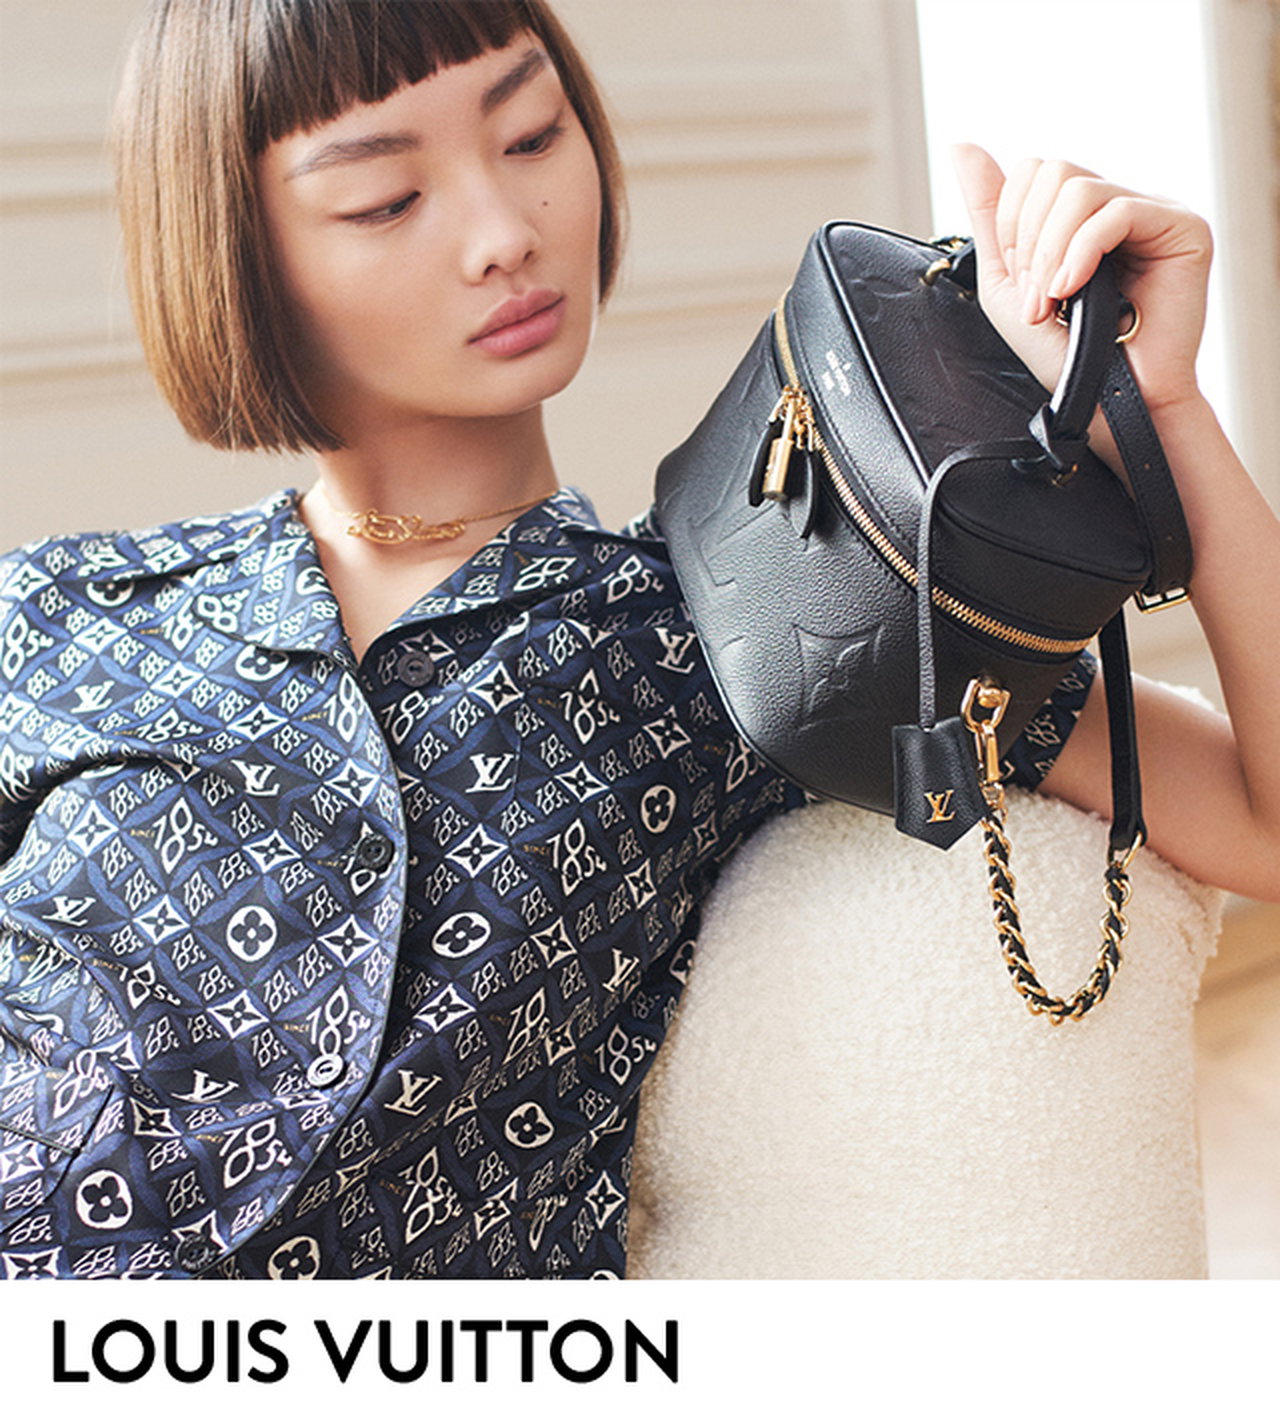 Nordstrom: New arrivals from Louis Vuitton